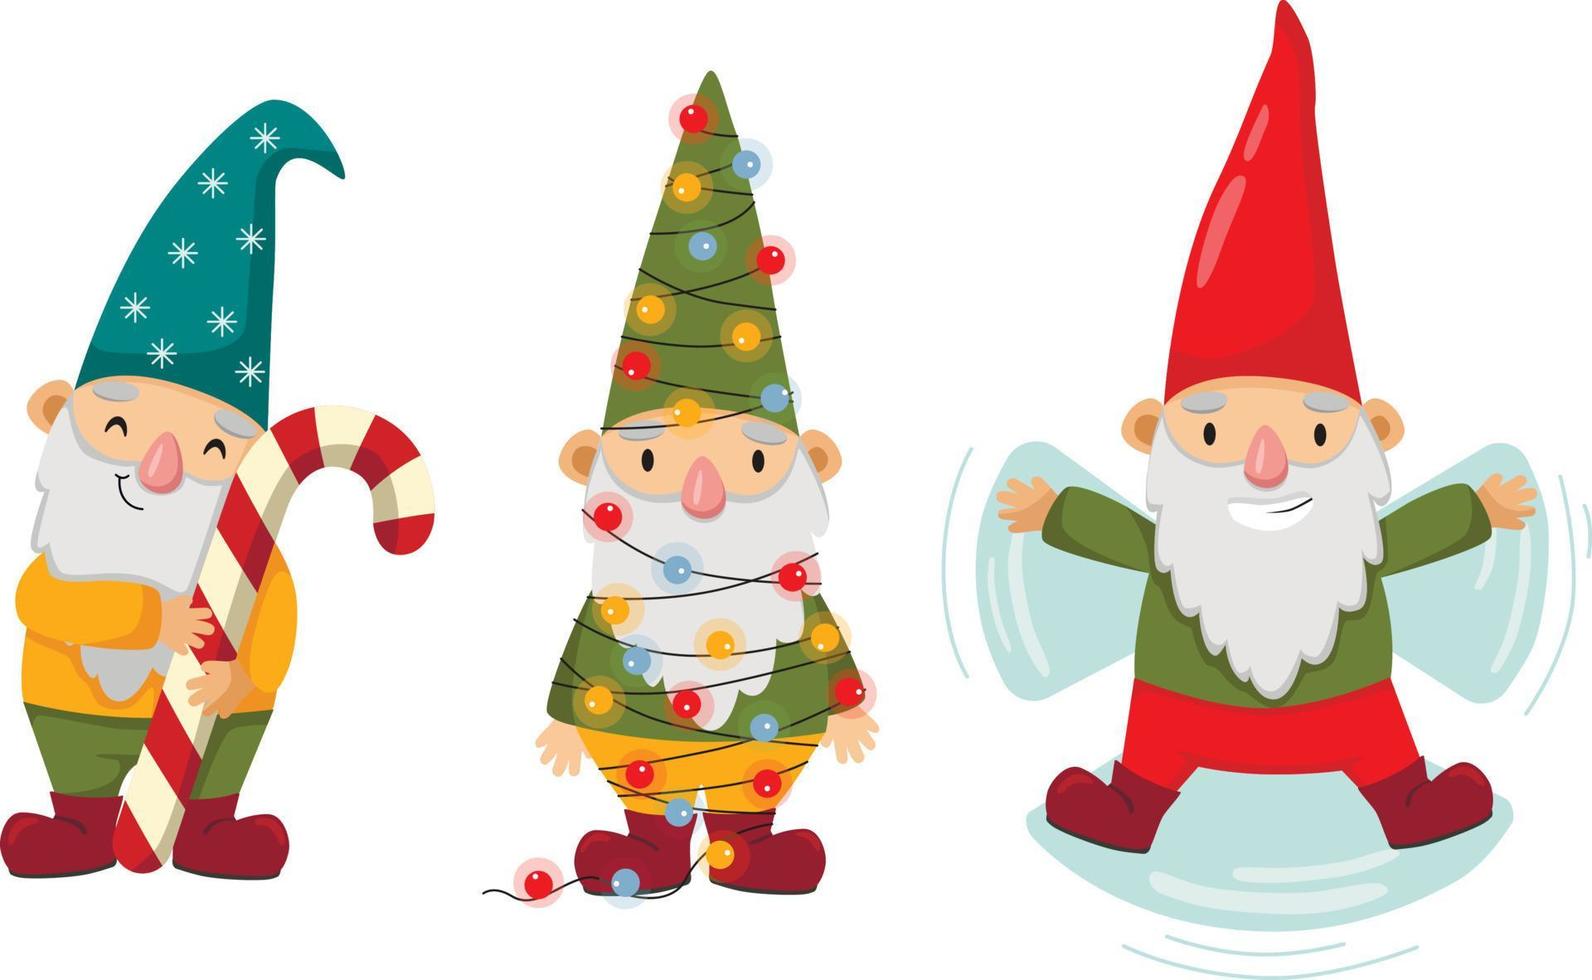 Happy cute little gnomes in winter. Funny bearded garden dwarfs with candy, Christmas lights, and snow. Colored flat vector illustration of fairytale characters isolated on white background.